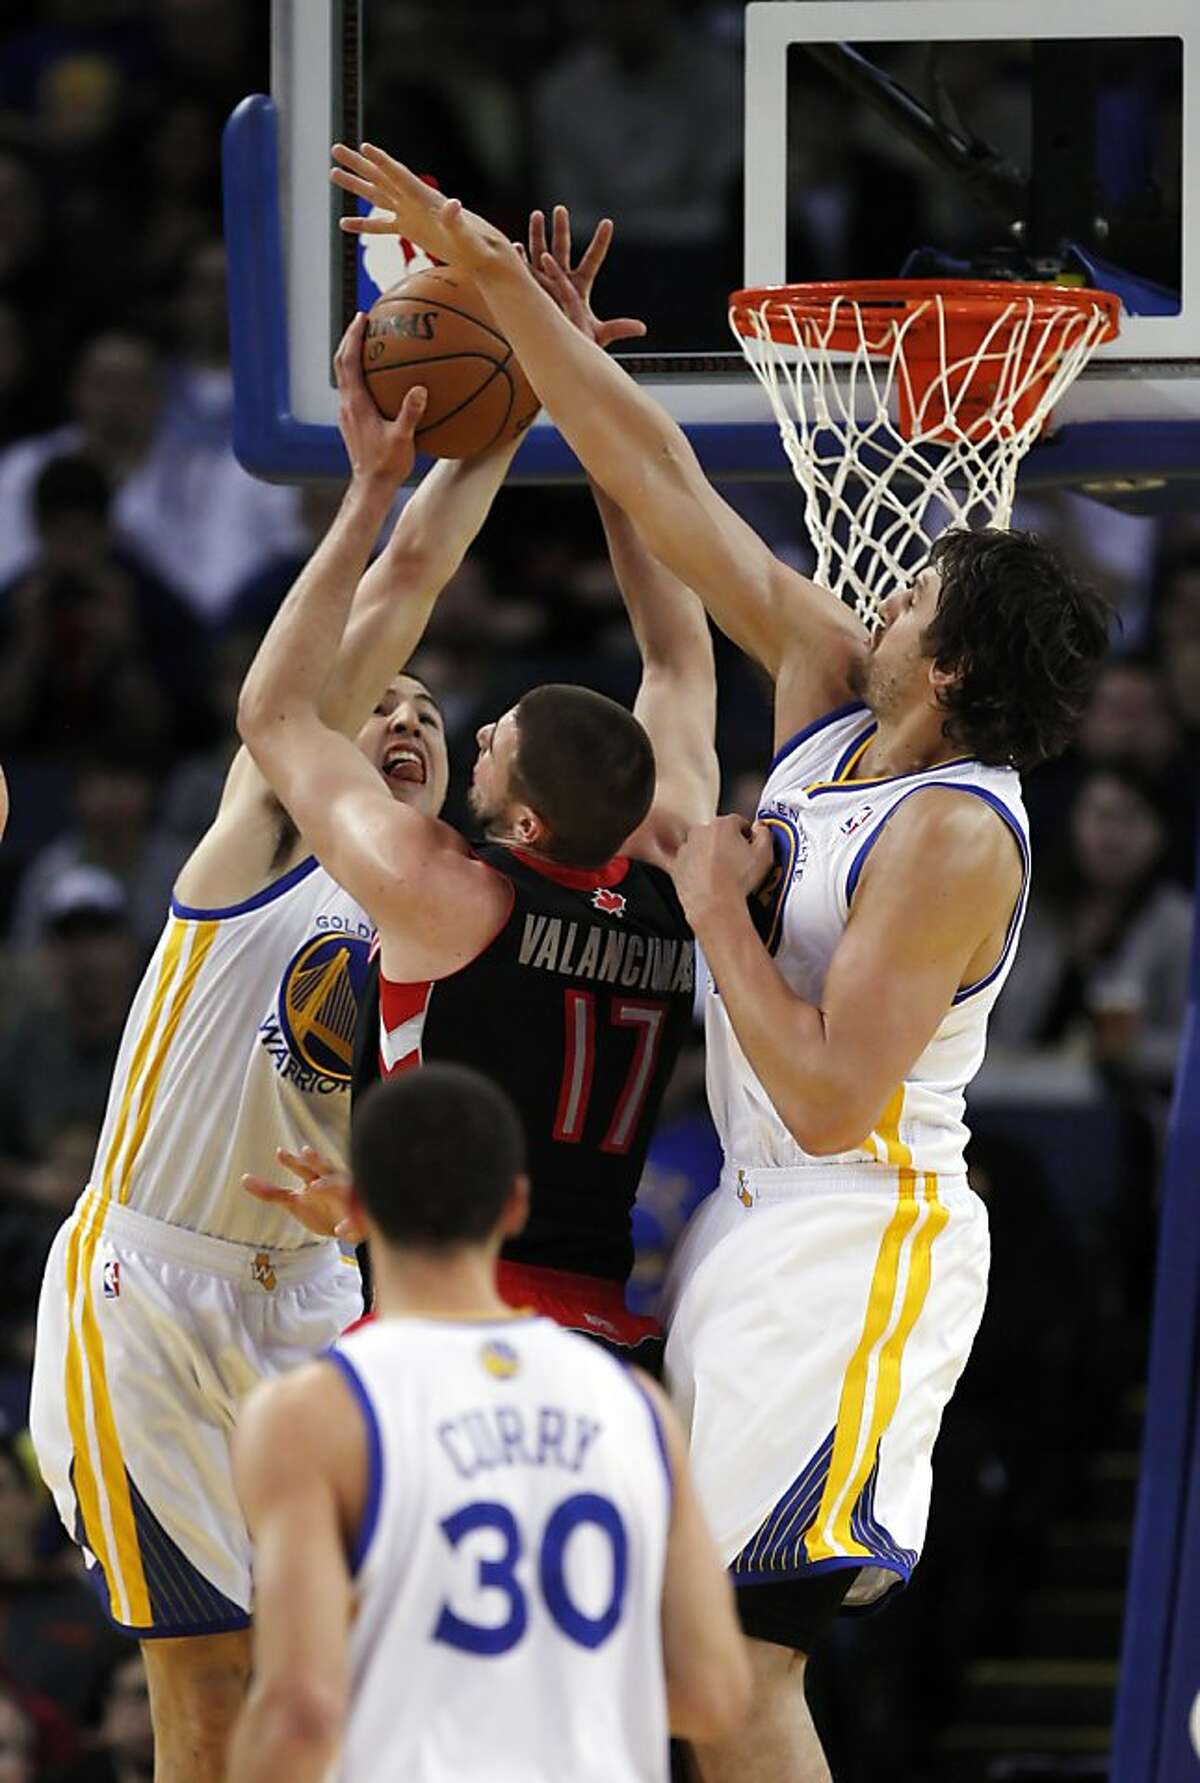 Klay Thompson, left, and Andrew Bogut, right, guard against Toronto's Jonas Valanciunas in the first half. The Golden State Warriors played the Toronto Raptors at Oracle Arena in Oakland, Calif., on Monday, March 4, 2013.